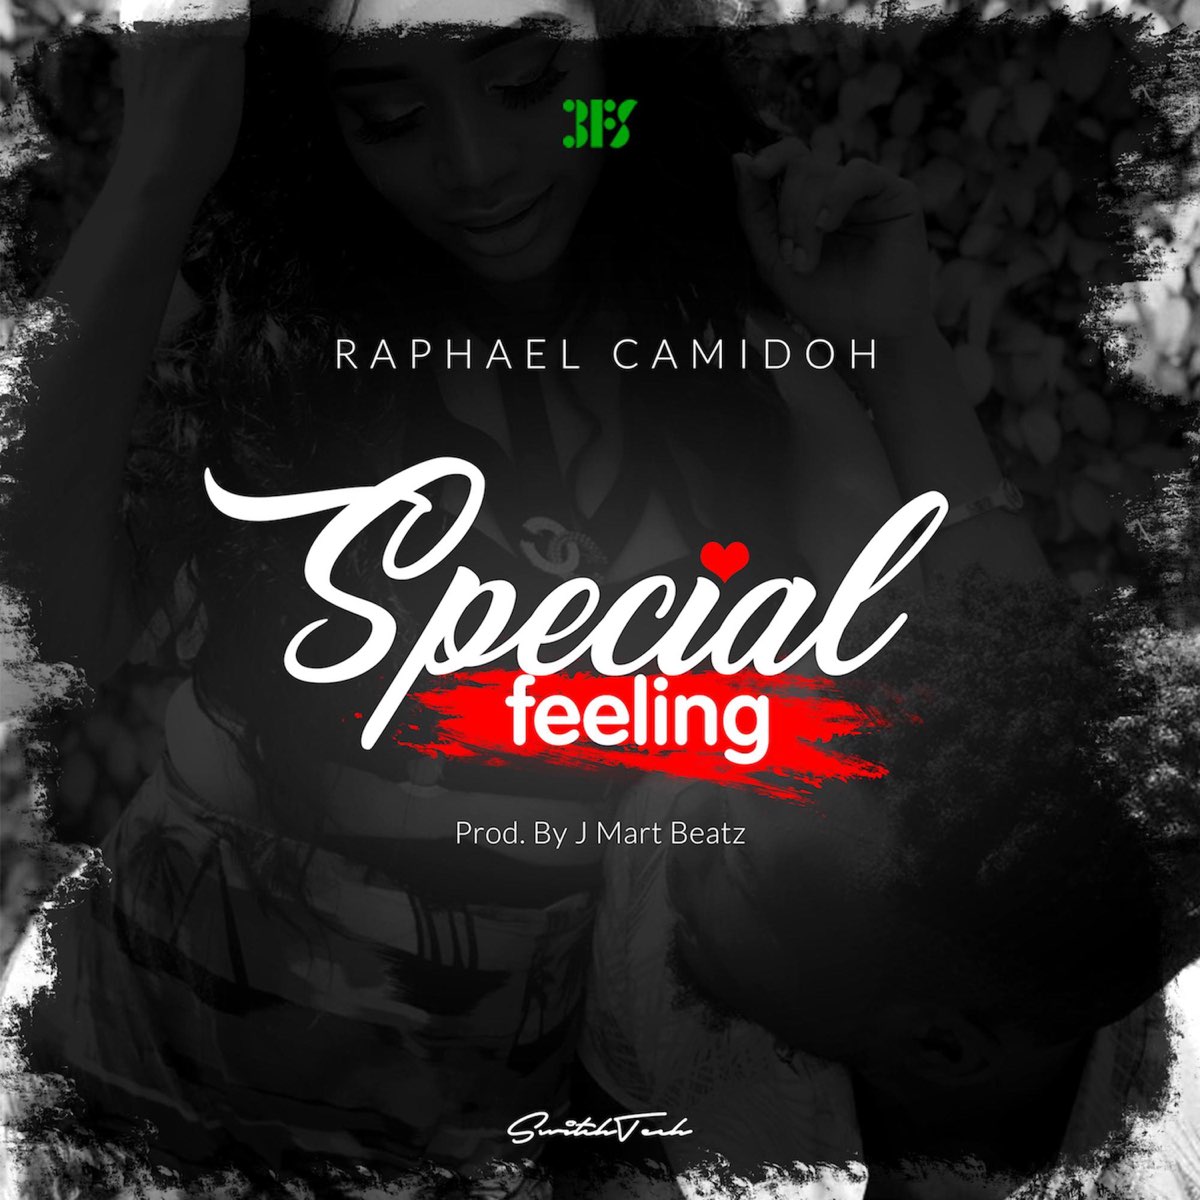 Special feeling. Feel Special Single. Feel Special Cover album. I like feeling special